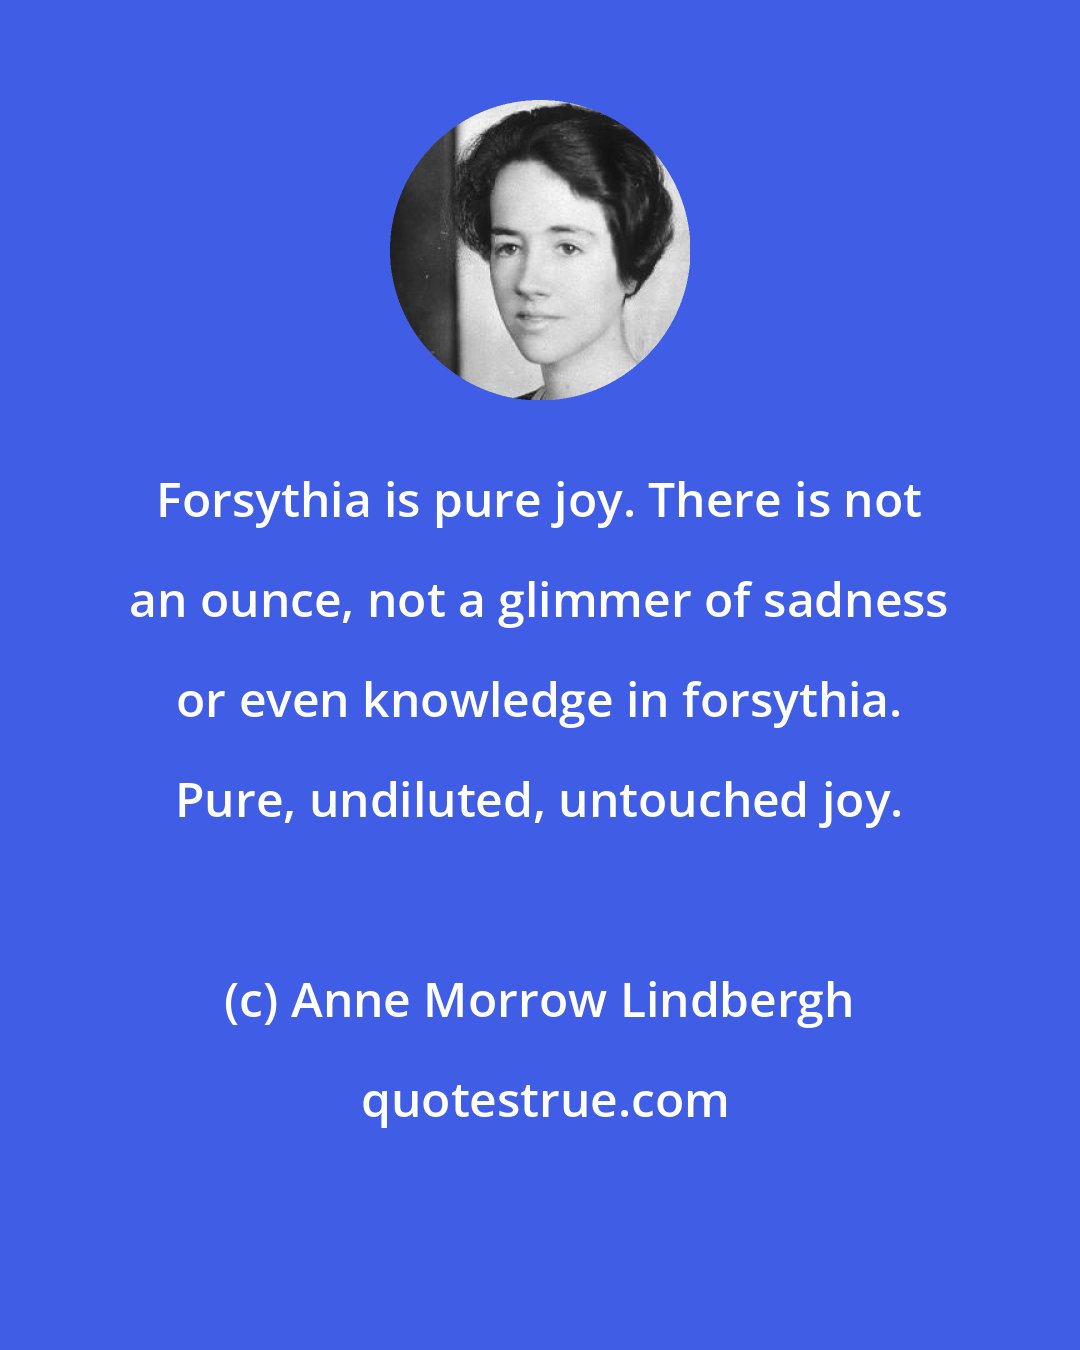 Anne Morrow Lindbergh: Forsythia is pure joy. There is not an ounce, not a glimmer of sadness or even knowledge in forsythia. Pure, undiluted, untouched joy.